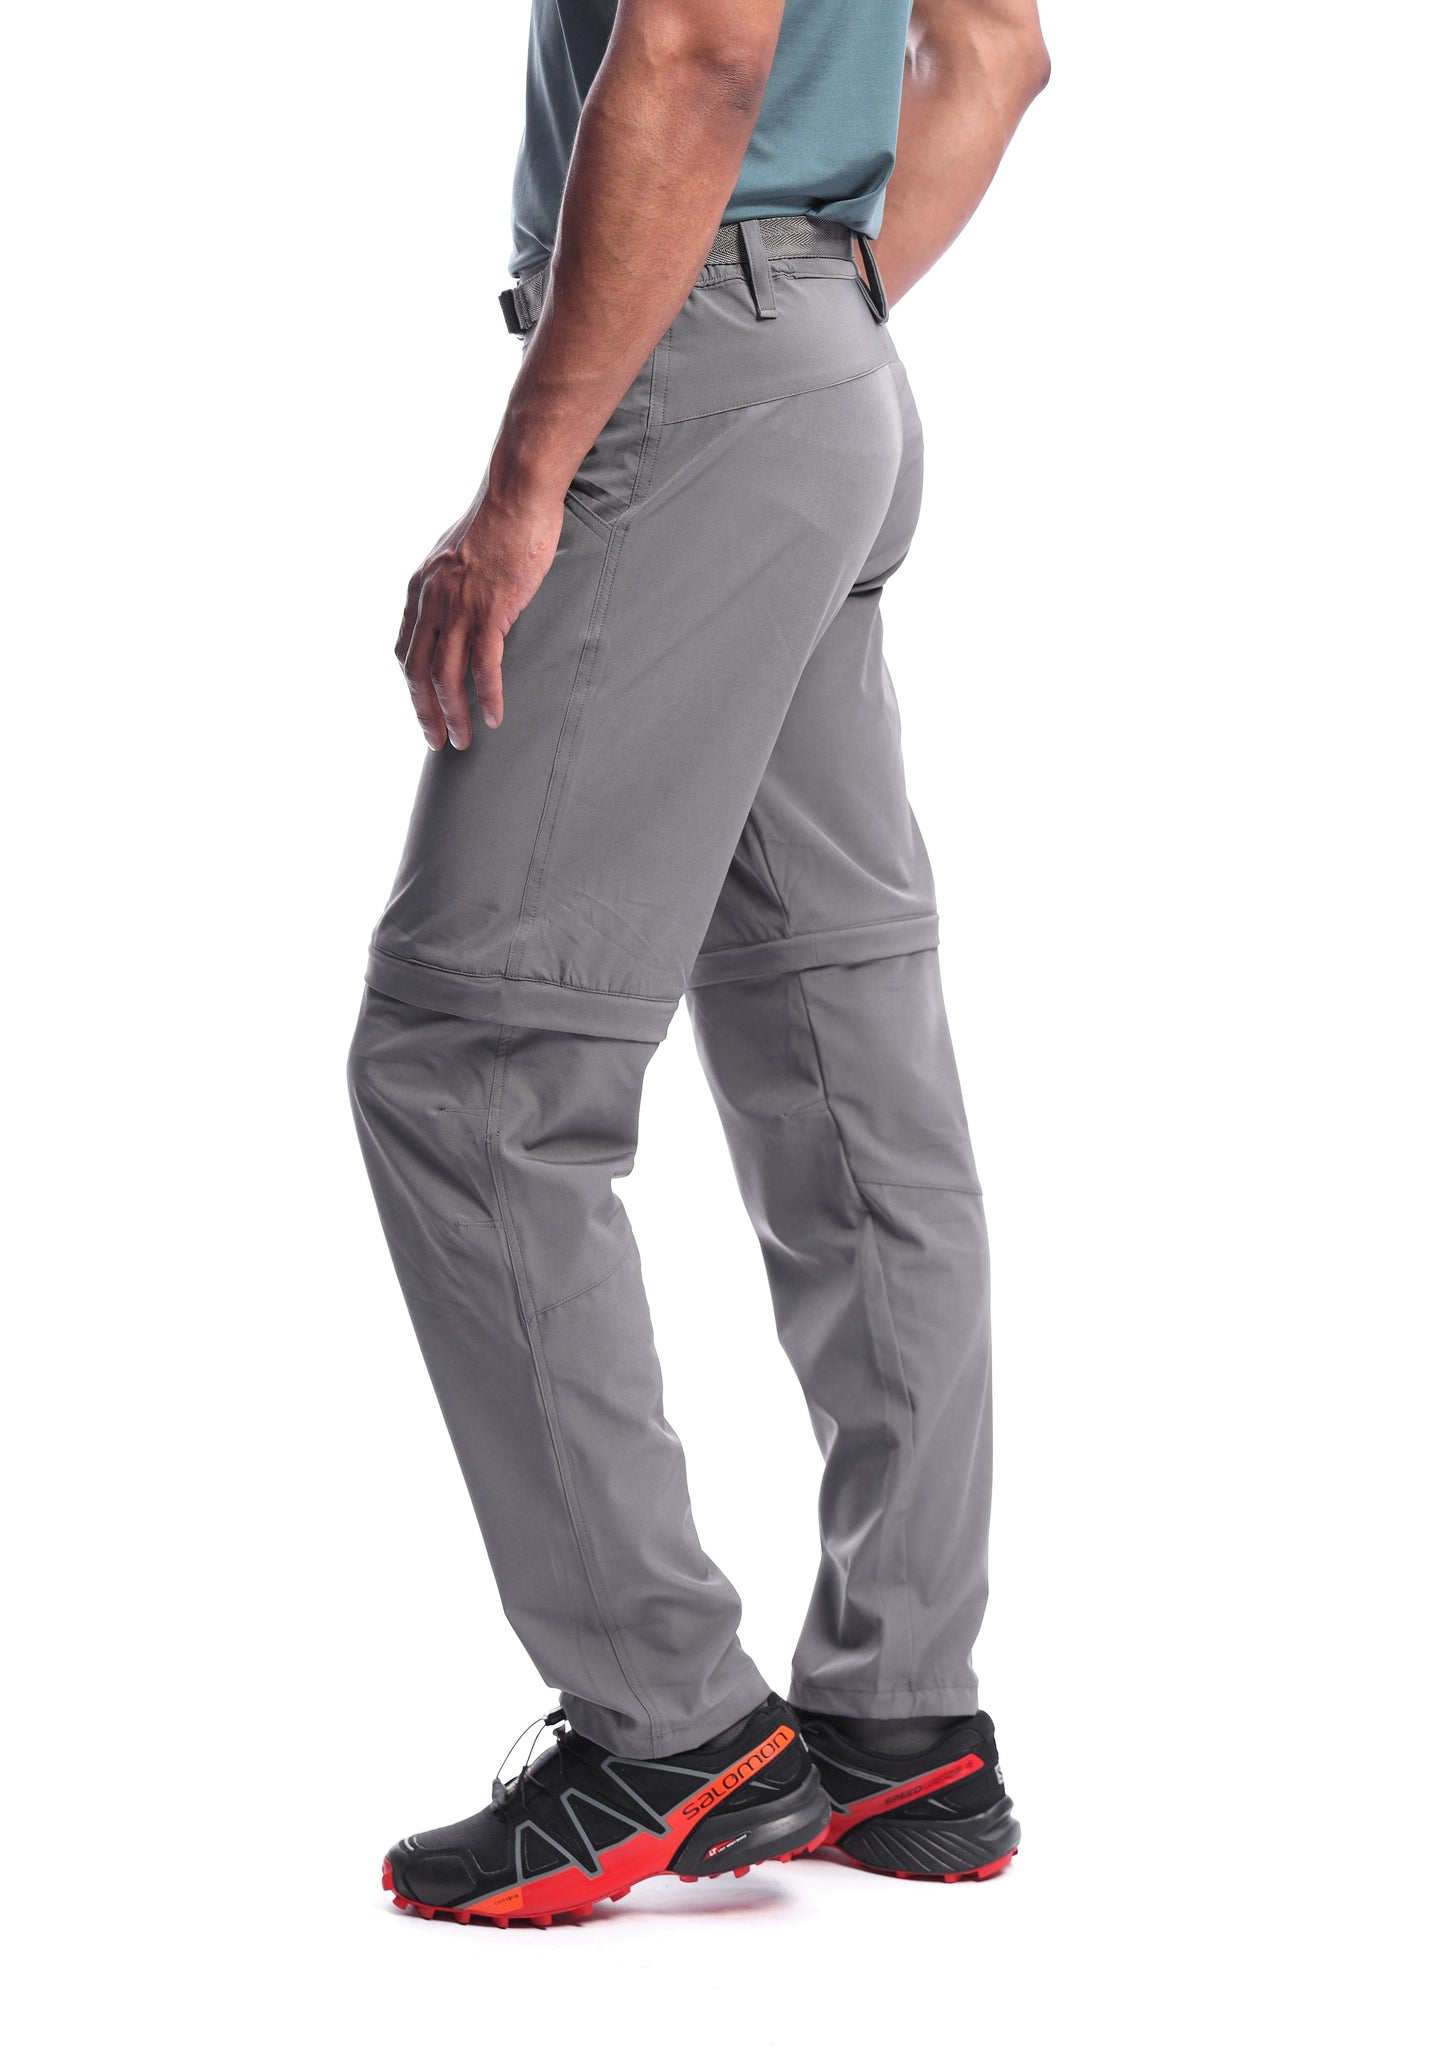 Mens Hiking Pants Online  Buy Camping  Hiking Pants for Men in India   Best Prices  Amazonin